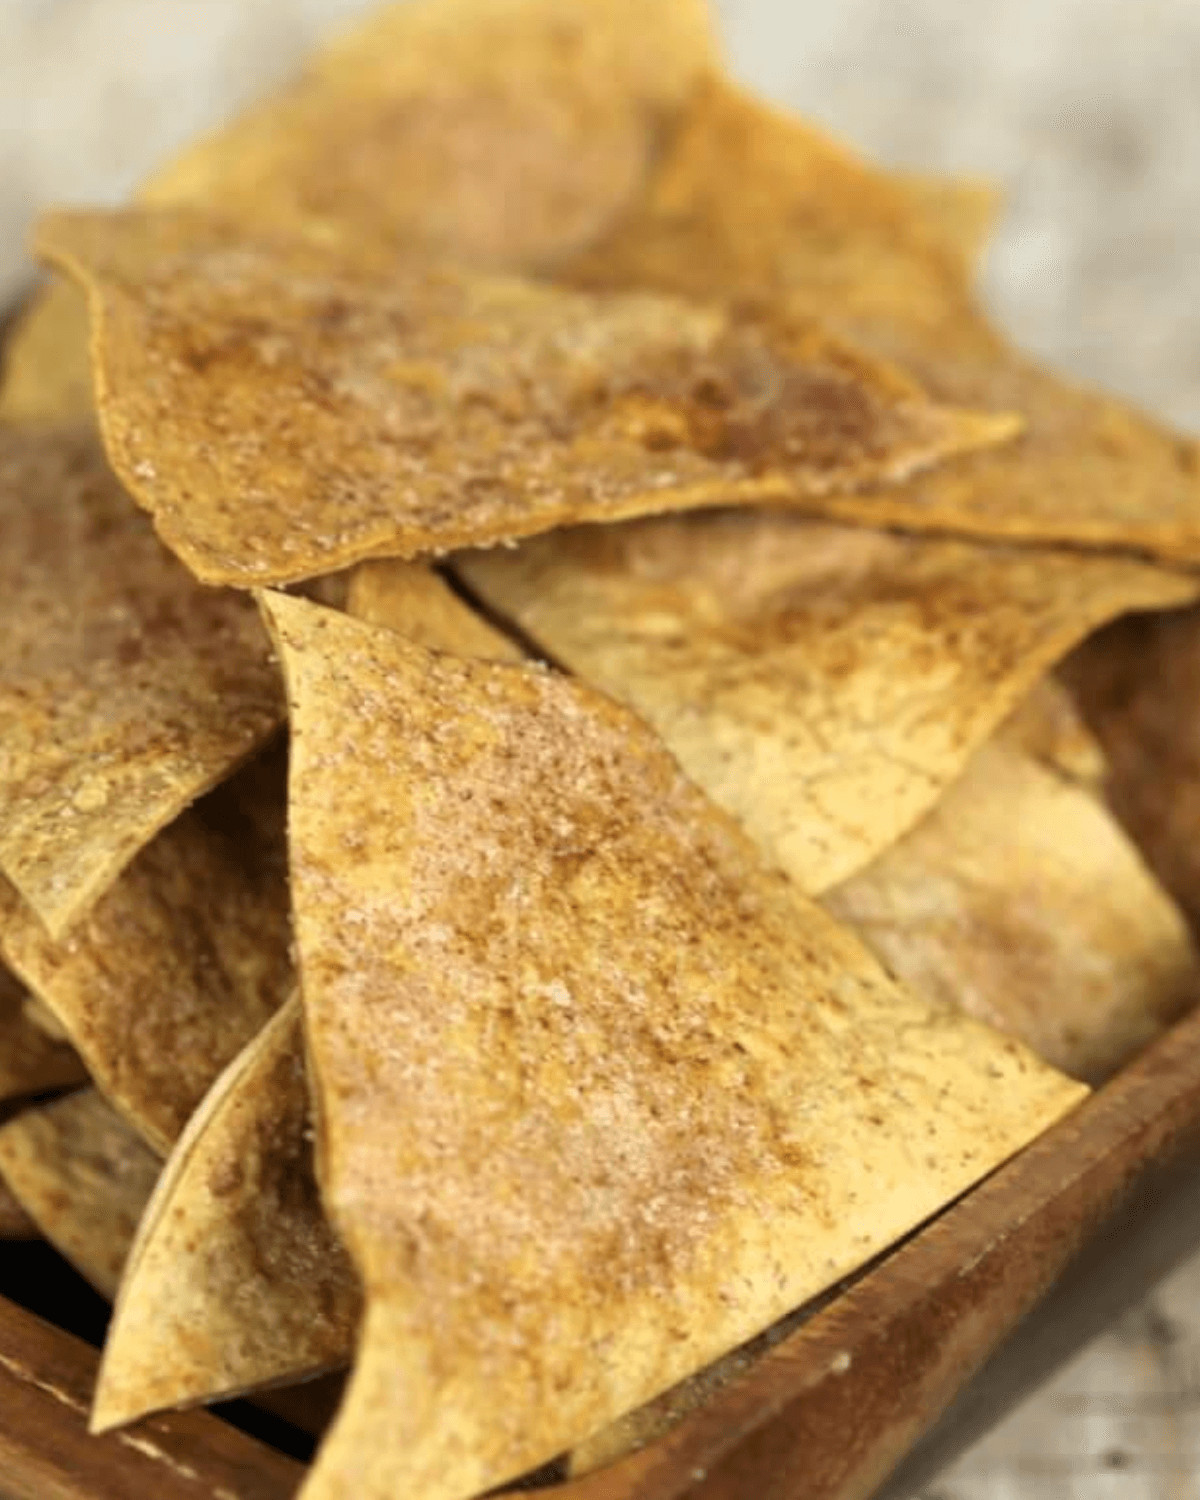 A closeup of the finished cinnamon tortilla chip.